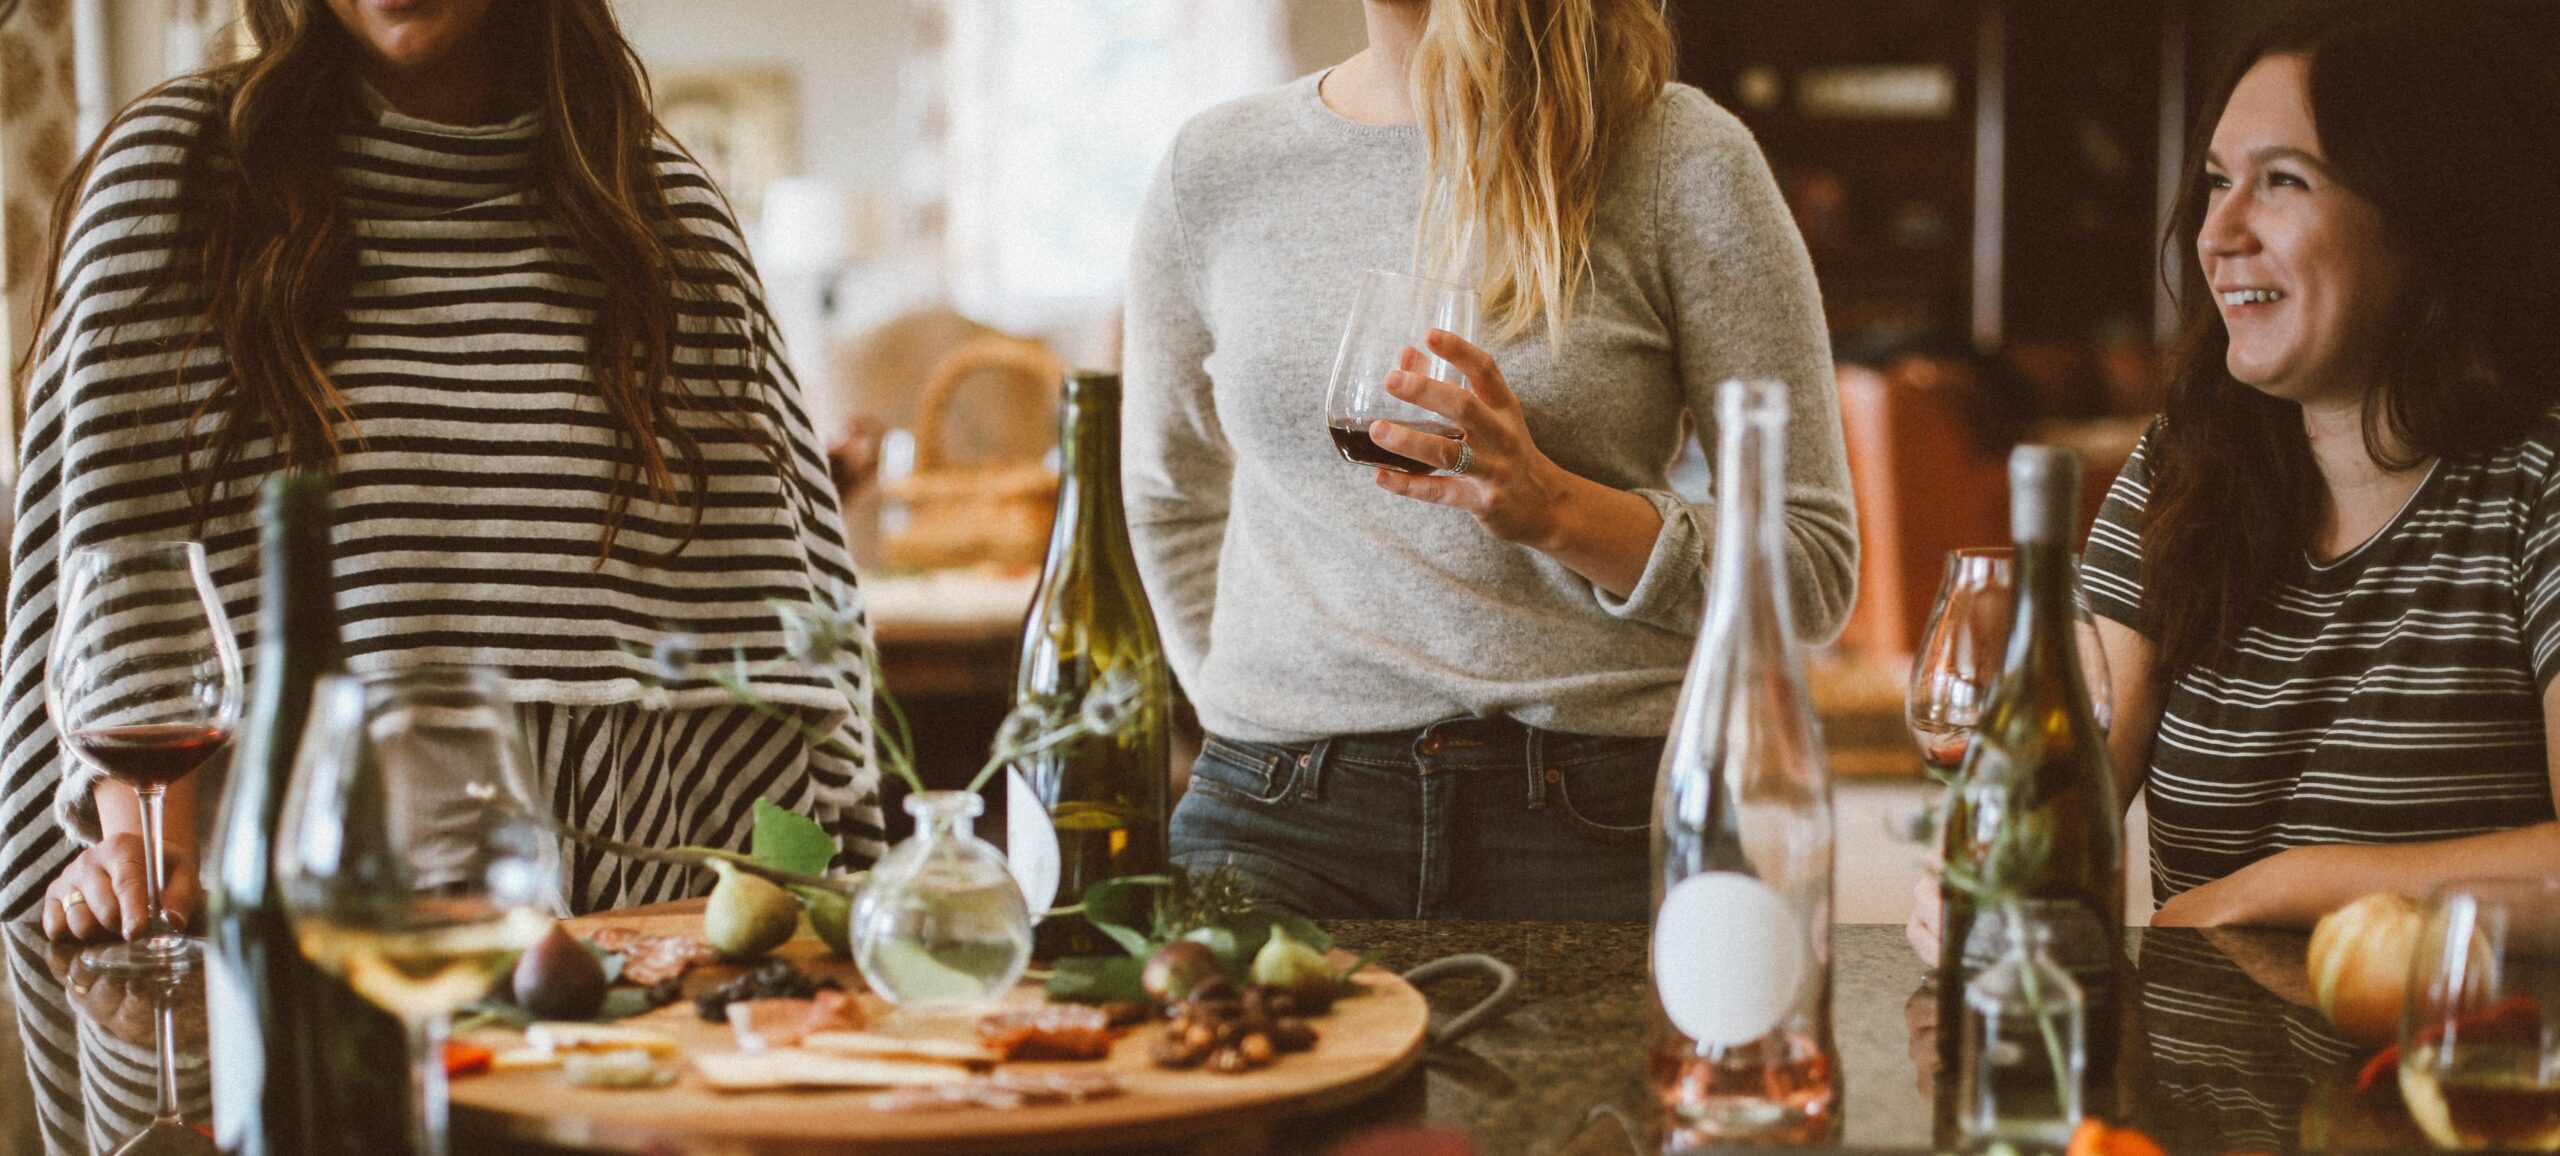 7 Tips For How To Host A Stress-Free Dinner Party